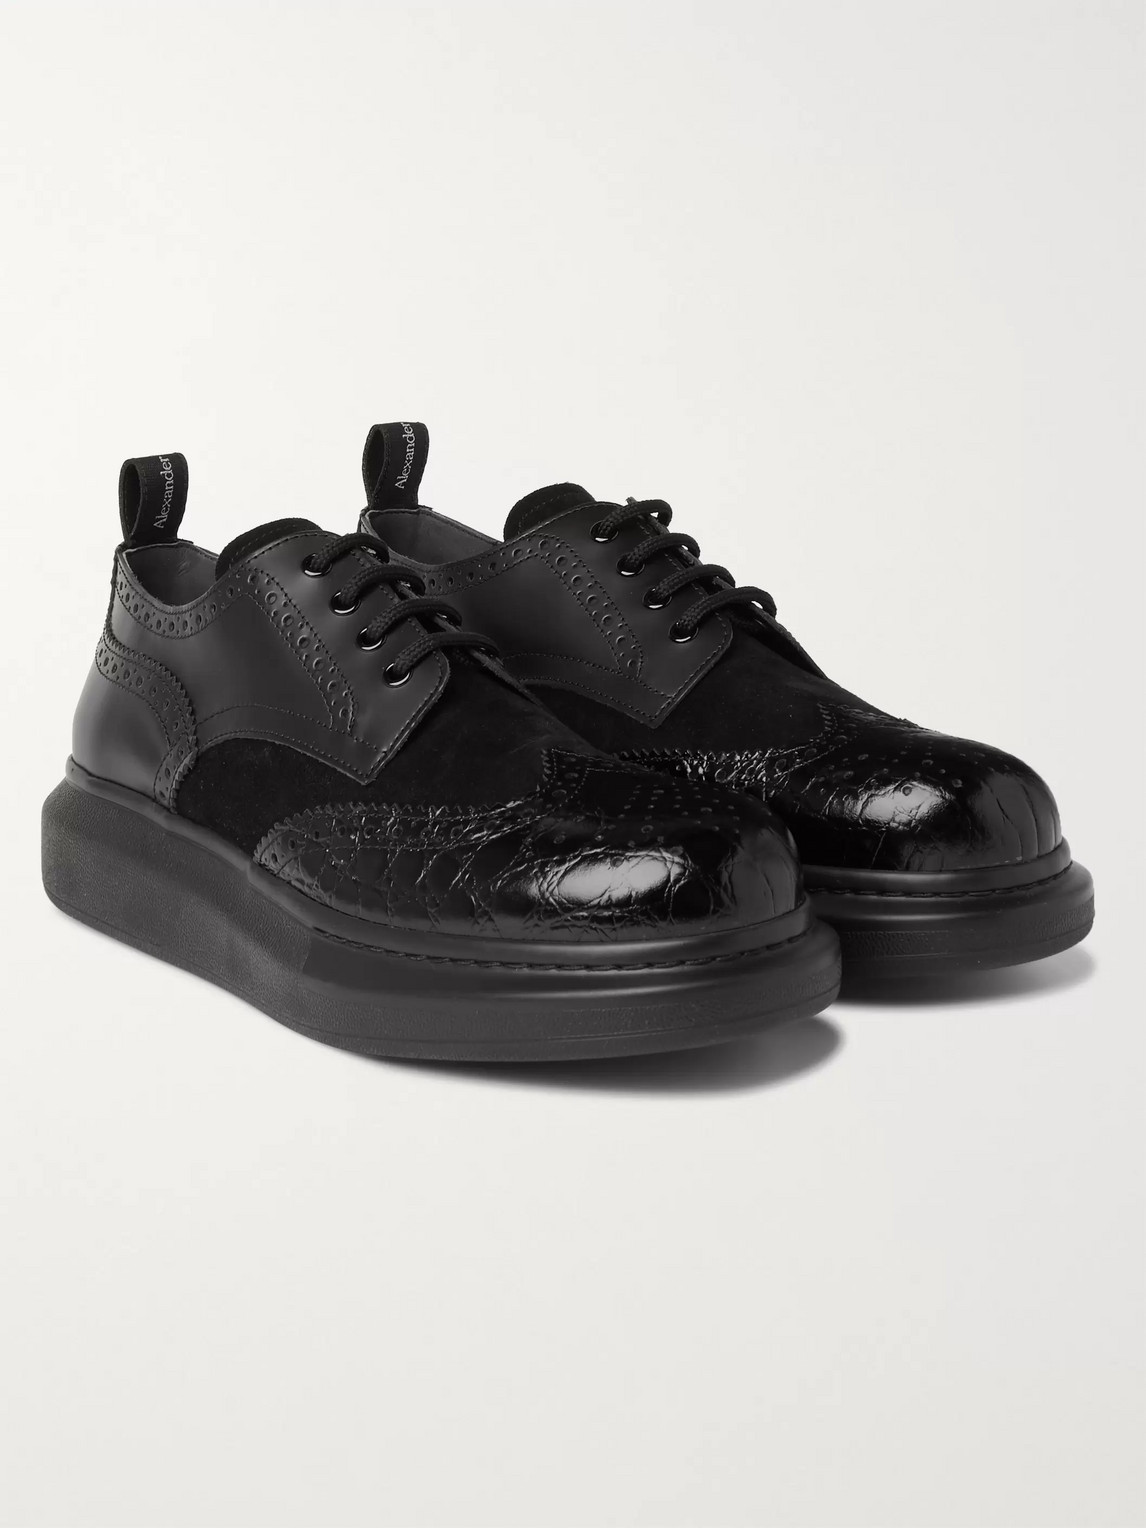 ALEXANDER MCQUEEN EXAGGERATED-SOLE SUEDE AND CROC-EFFECT LEATHER BROGUES